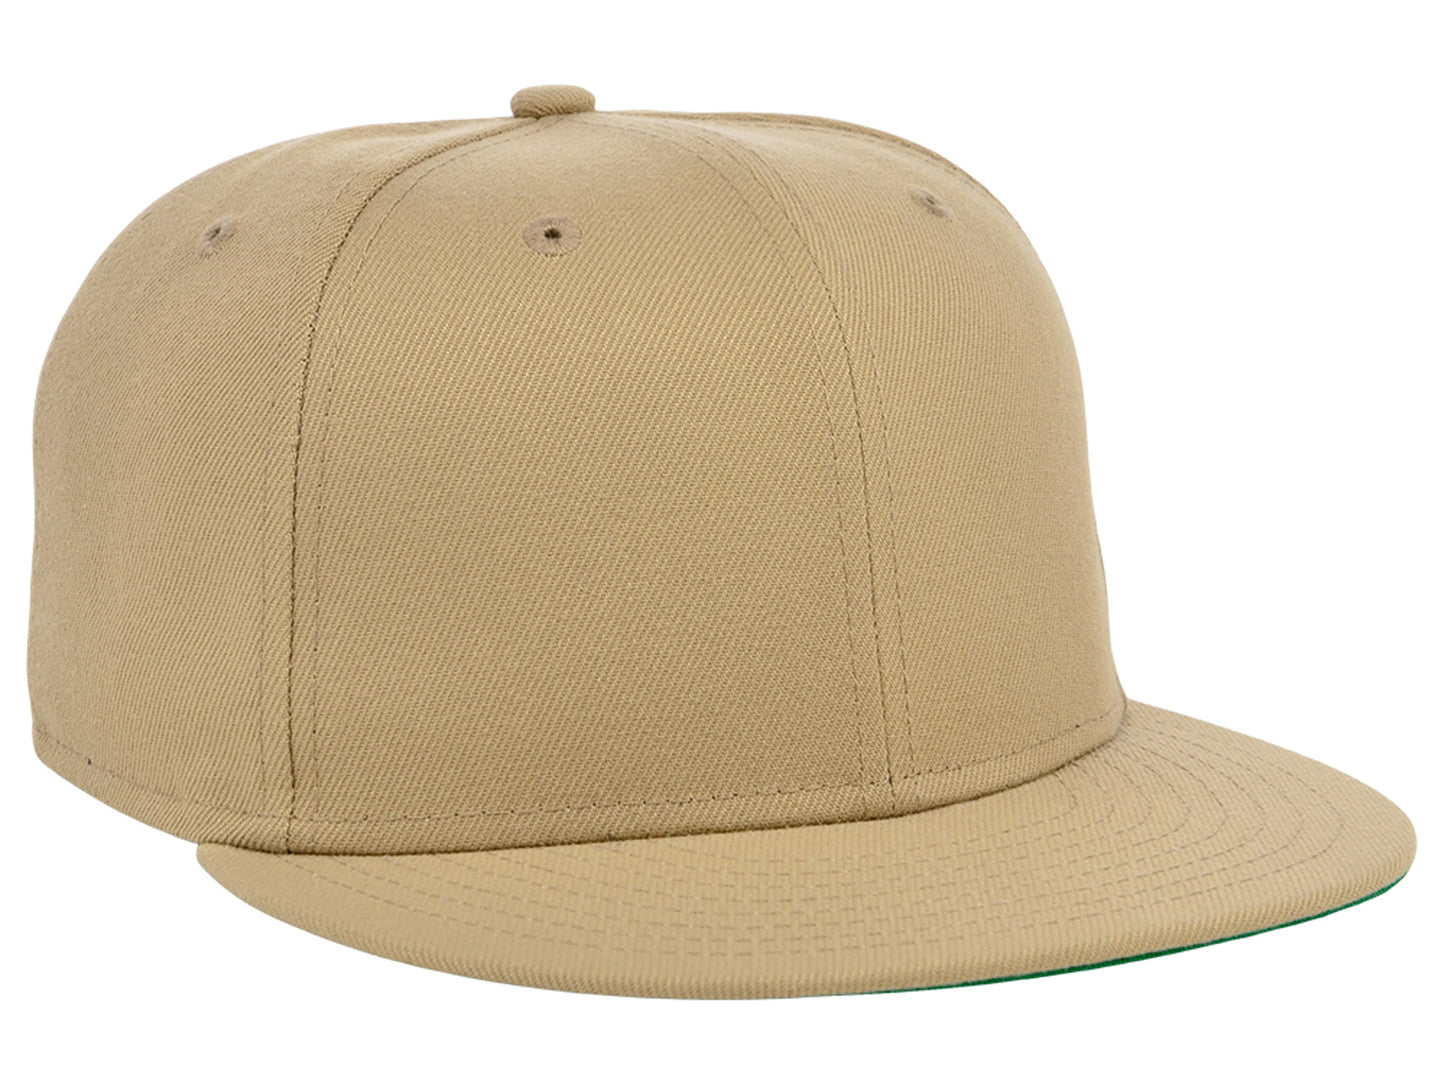 Crowns by Lids Full Court Fitted UV Cap - Khaki/Geen